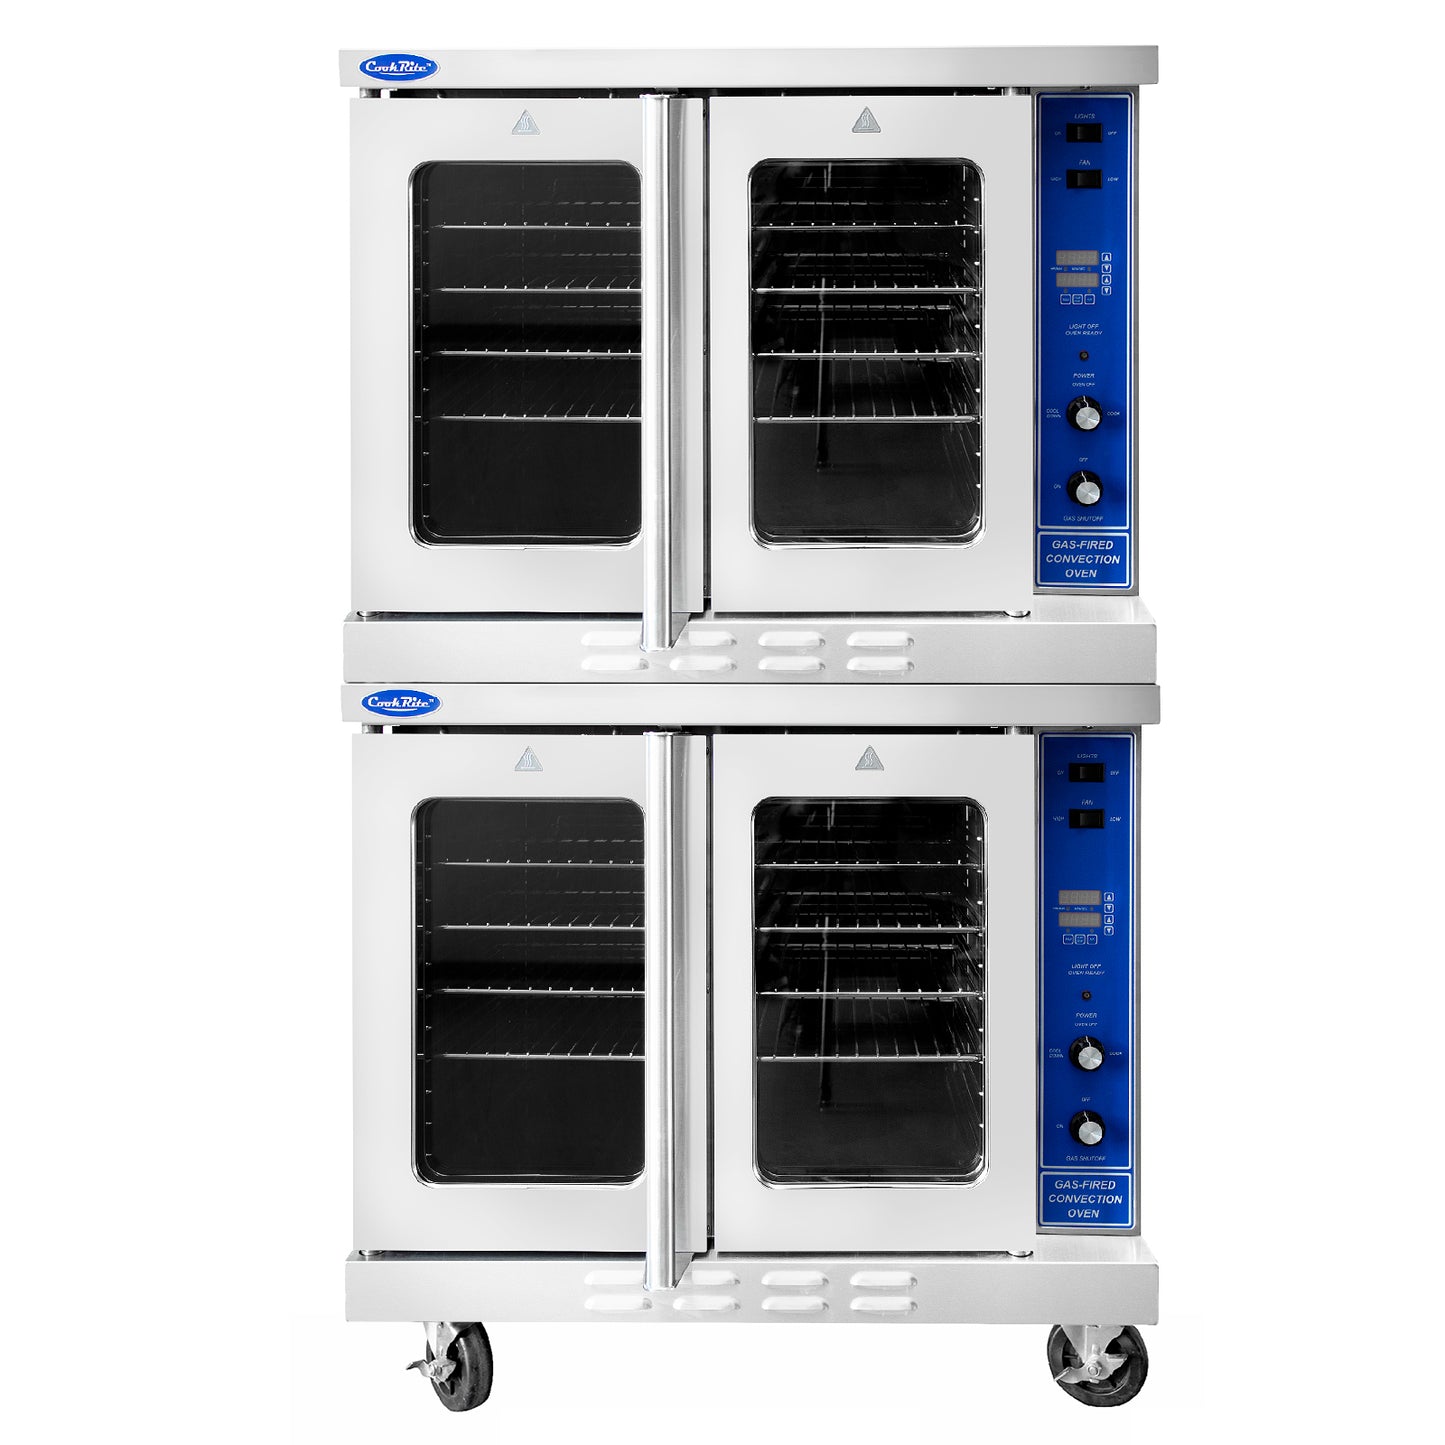 Atosa ATCO-513B-2 Double Bakery Depth Convection Oven with Total 92,000 B.T.U., Includes Connection Kit/Casters - Bakery Depth